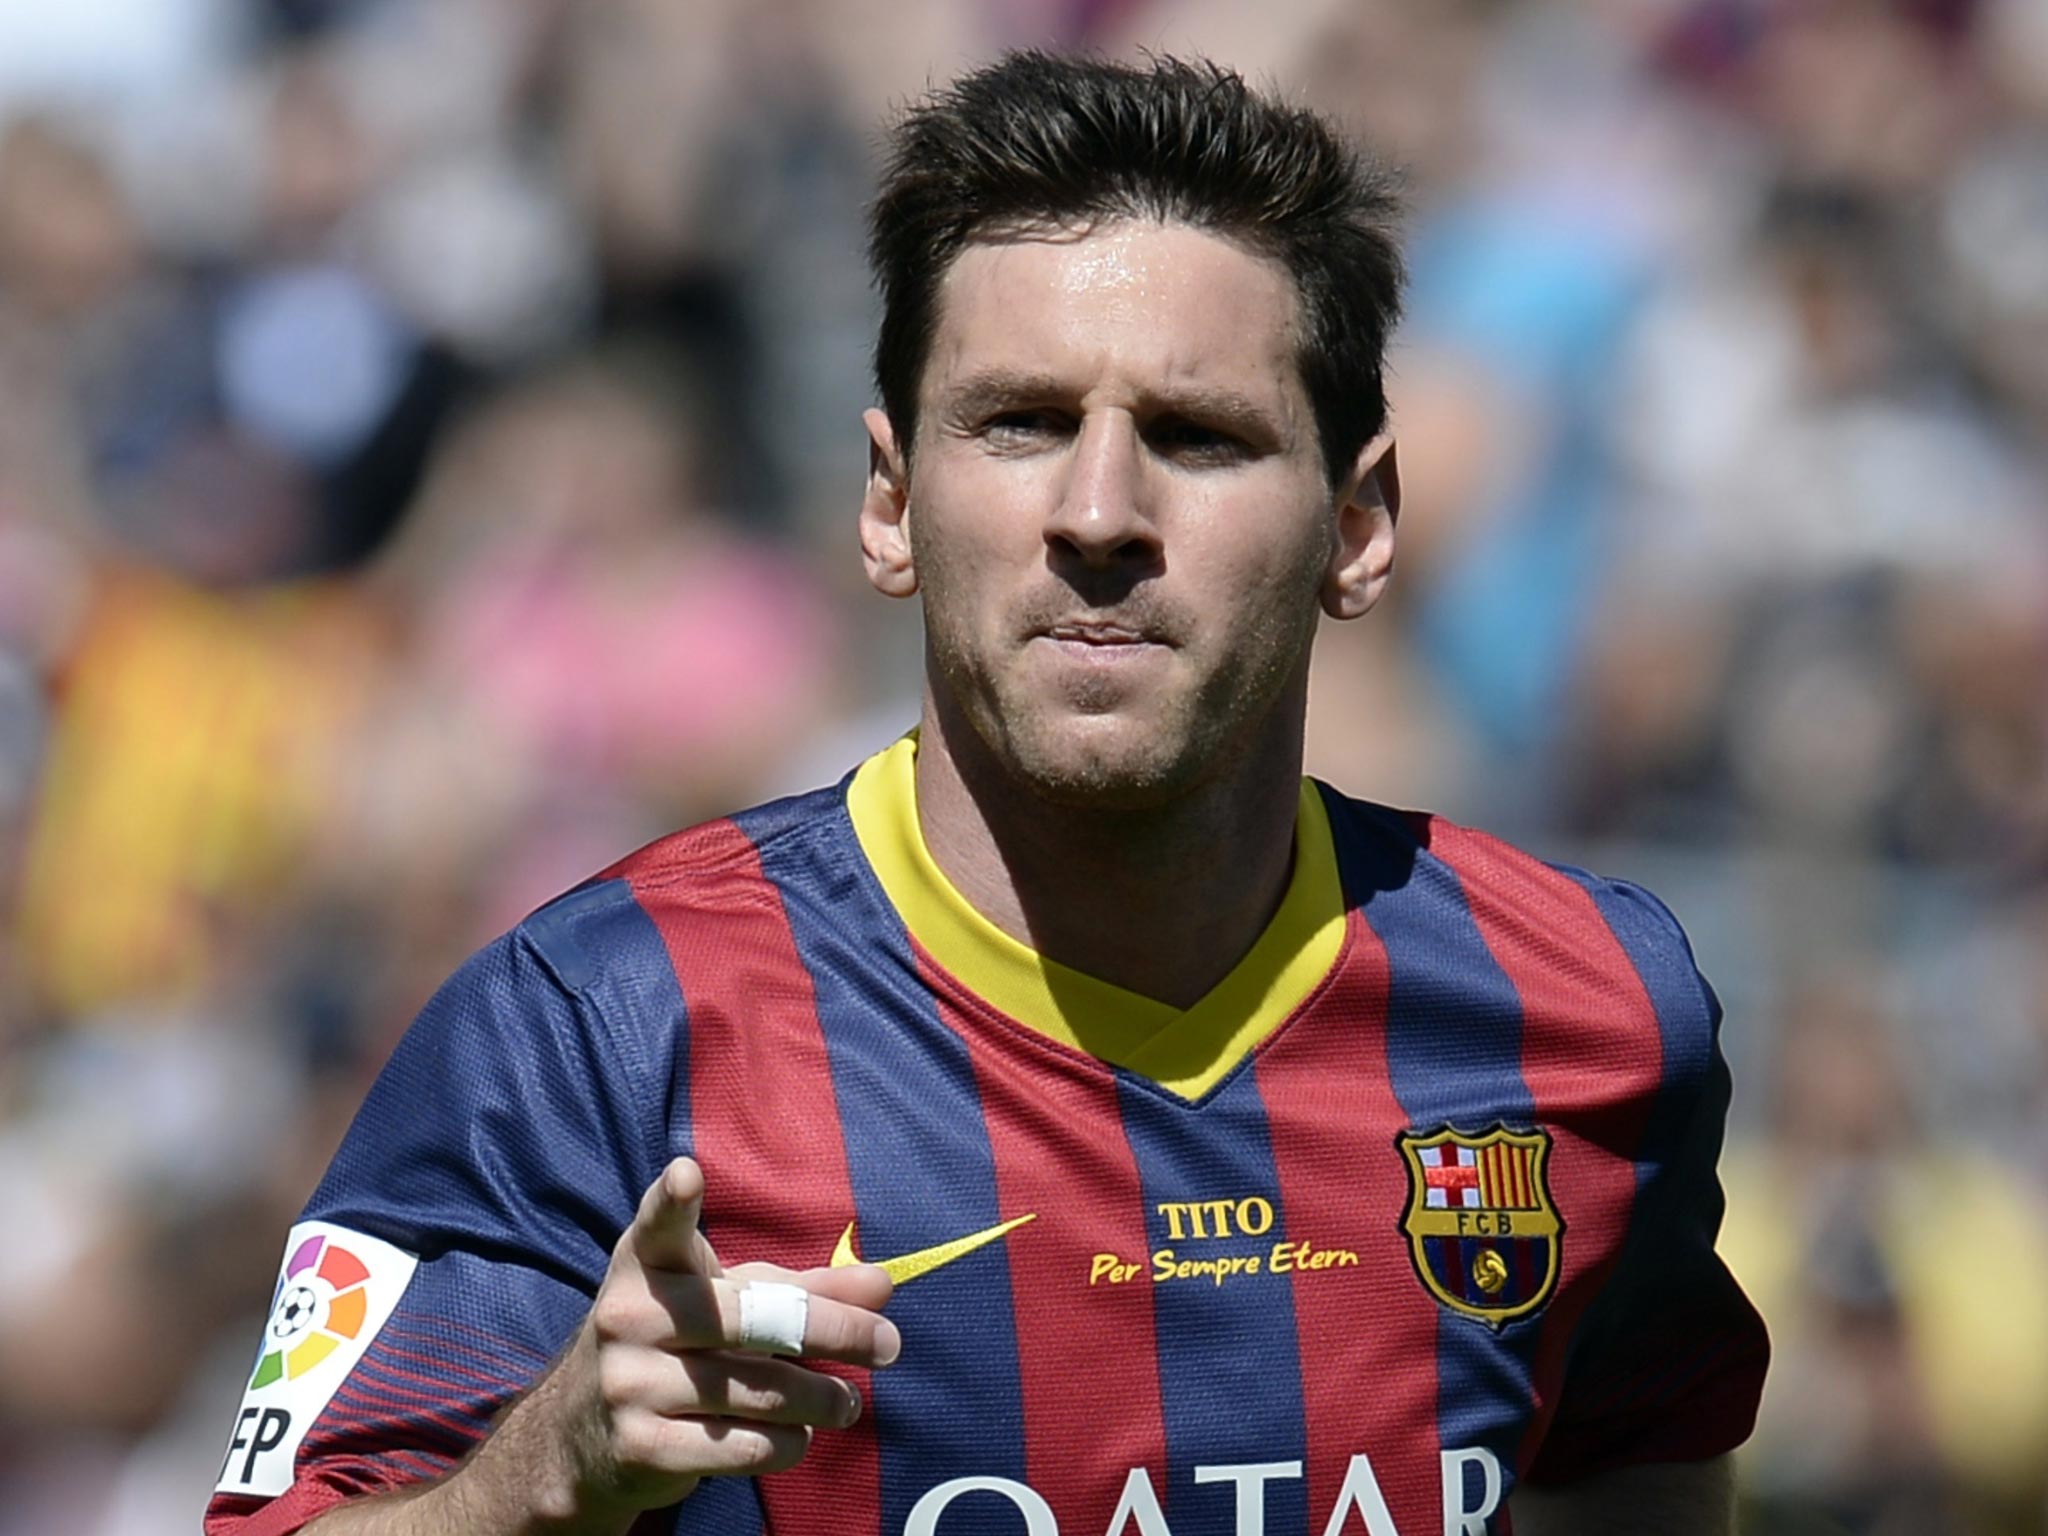 Retaining Lionel Messi, Barcelona’s record scorer, is a major boost with a transfer ban still a possibility